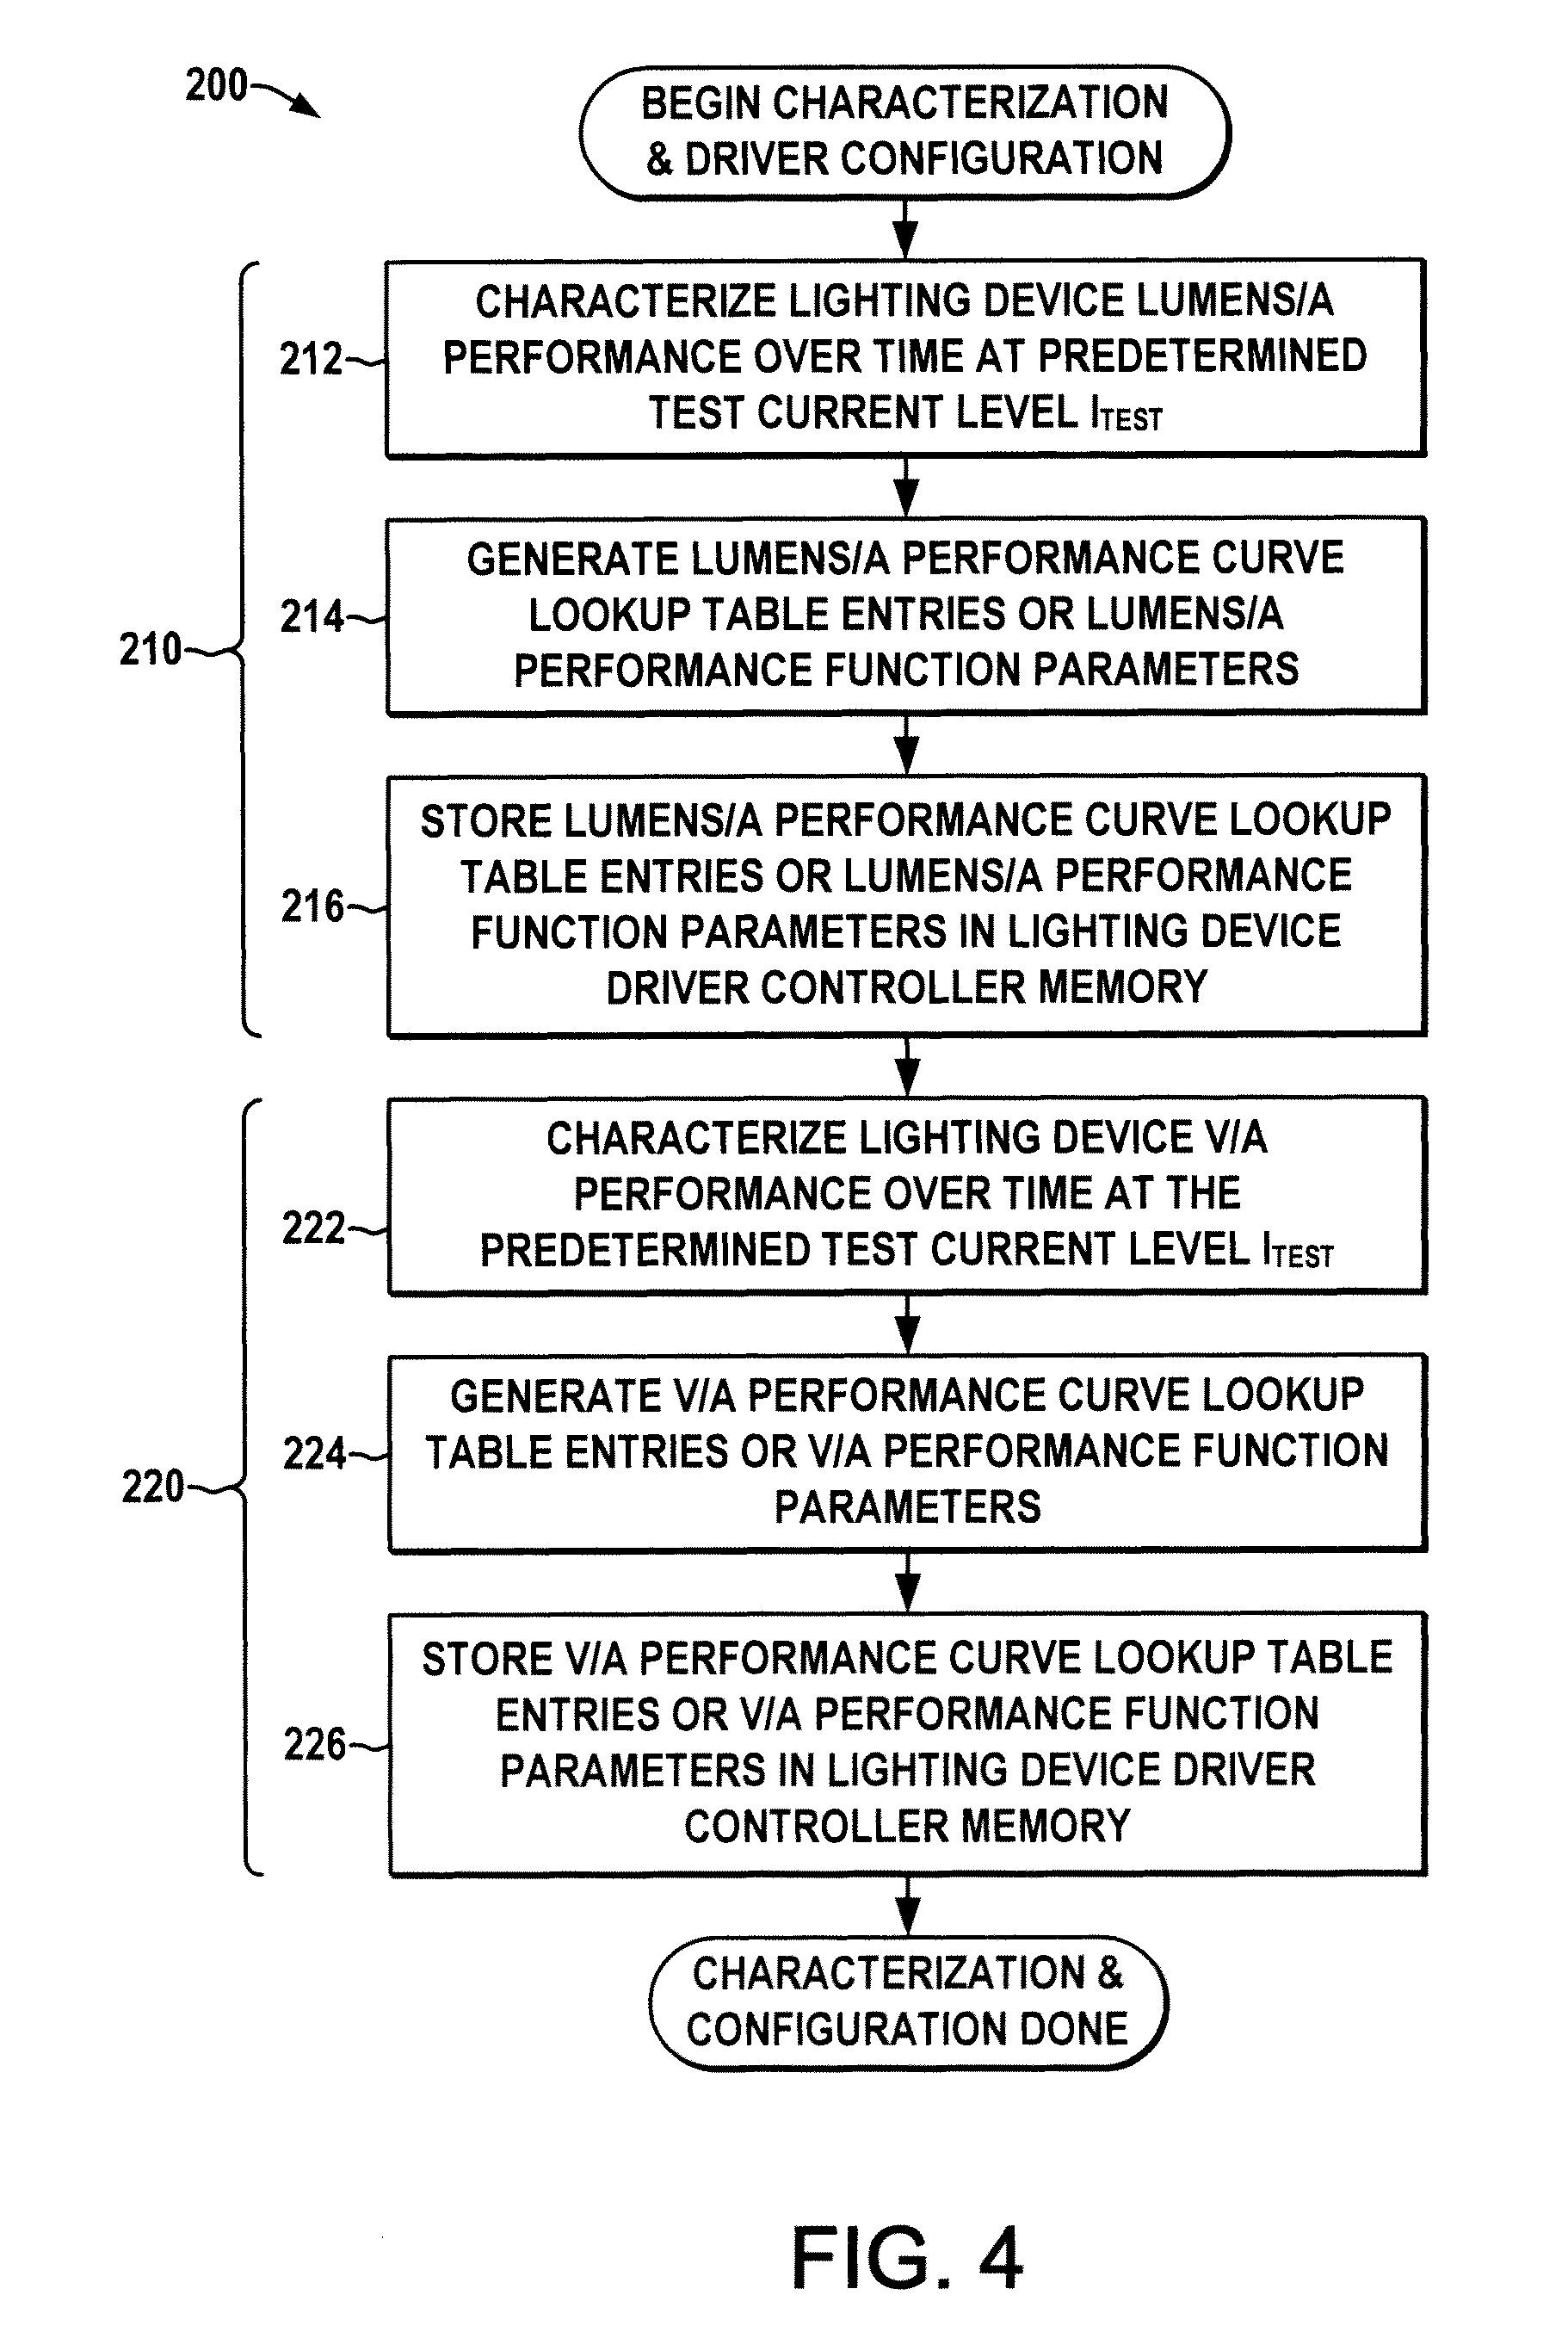 Knowledge-based driver apparatus for high lumen maintenance and end-of-life adaptation